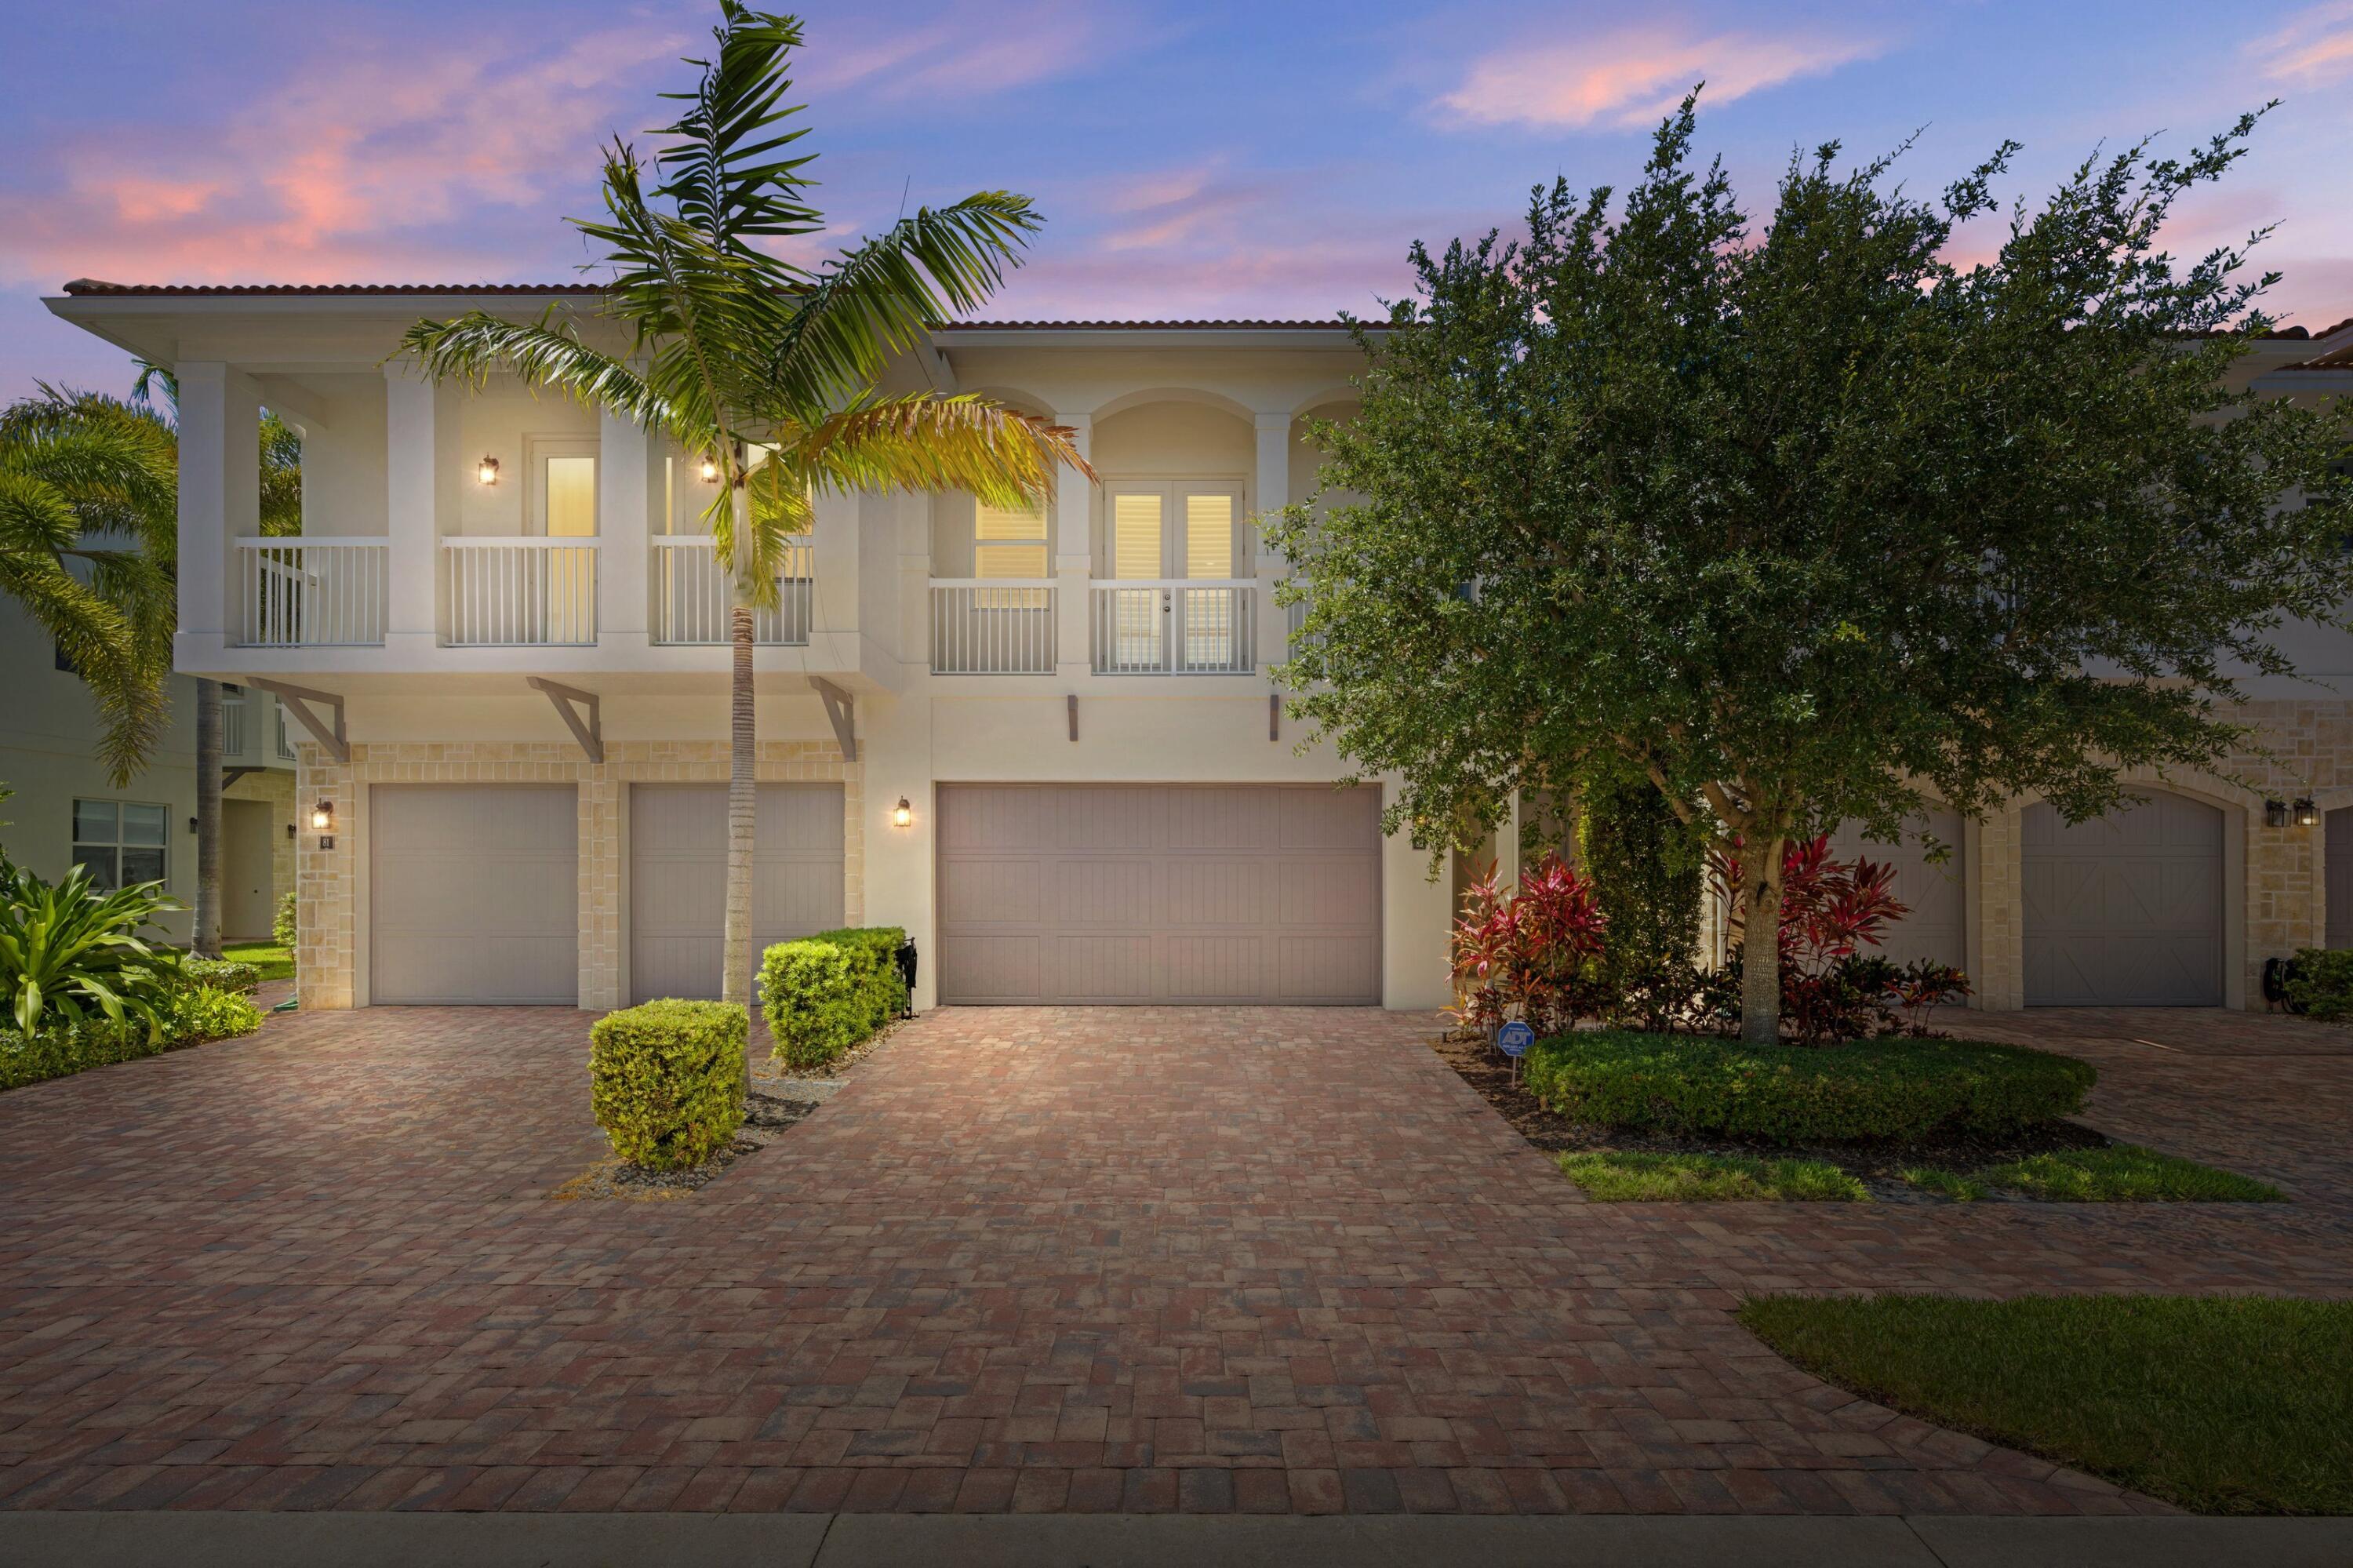 Property for Sale at 100 Nw 69th Circle 82, Boca Raton, Palm Beach County, Florida - Bedrooms: 4 
Bathrooms: 2.5  - $824,900